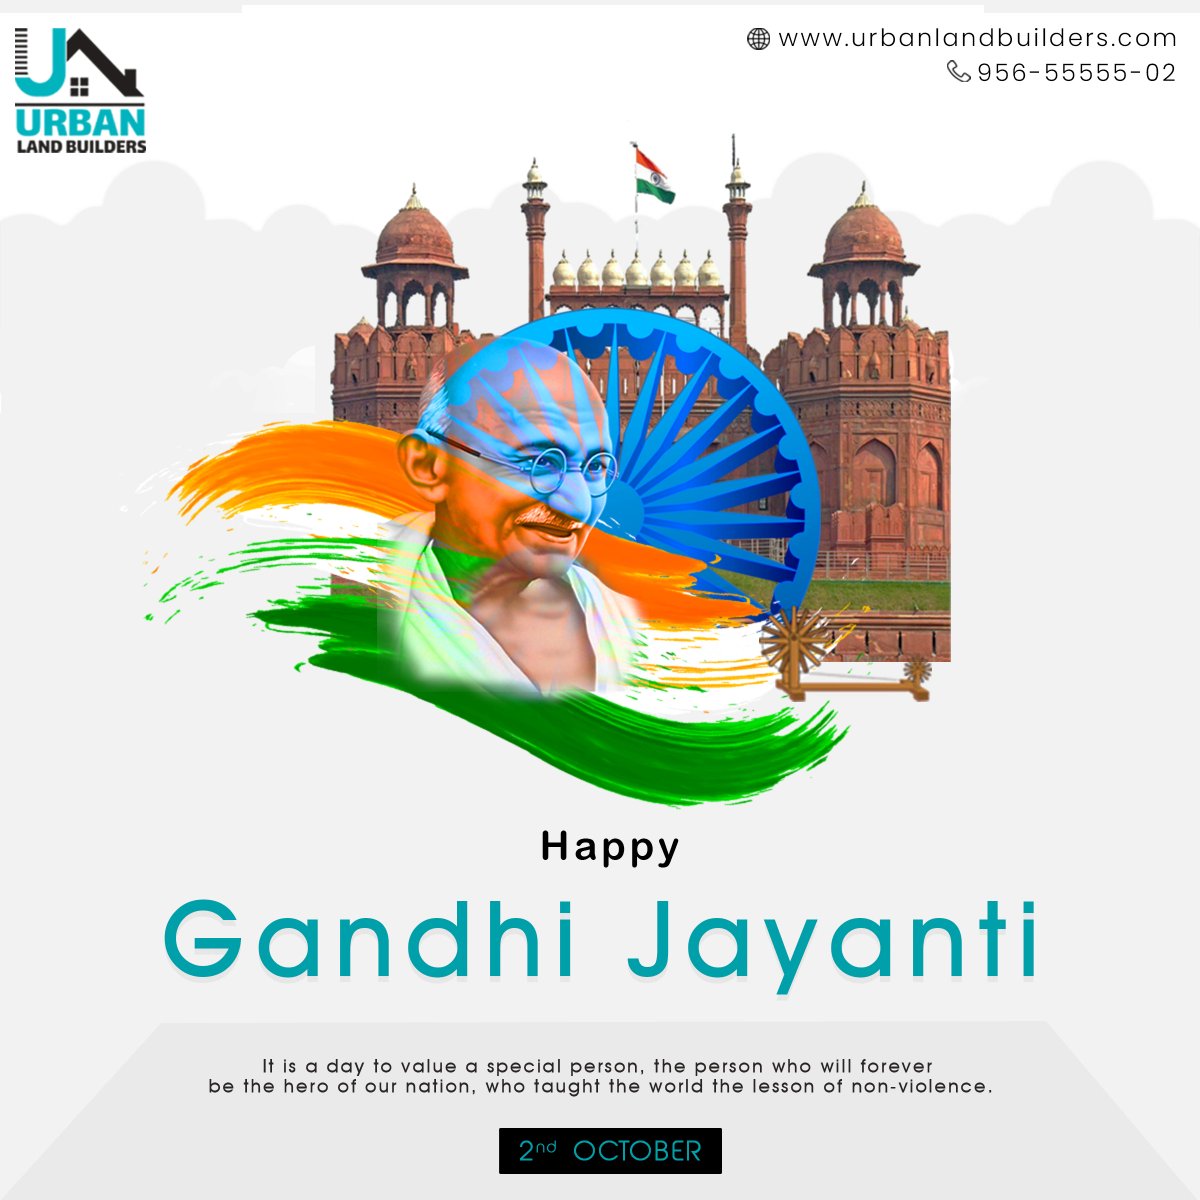 Wishing you a day filled with reflections on truth, non-violence, and the pursuit of a better tomorrow. Happy Gandhi Jayanti!

#GandhiJayanti #MahatmaGandhi #Gandhianthoughts #2ndoctober #GandhiJayantiwishes #happygandhijayanti #gandhijithoughts #homebuilders #UrbanLandBuilders